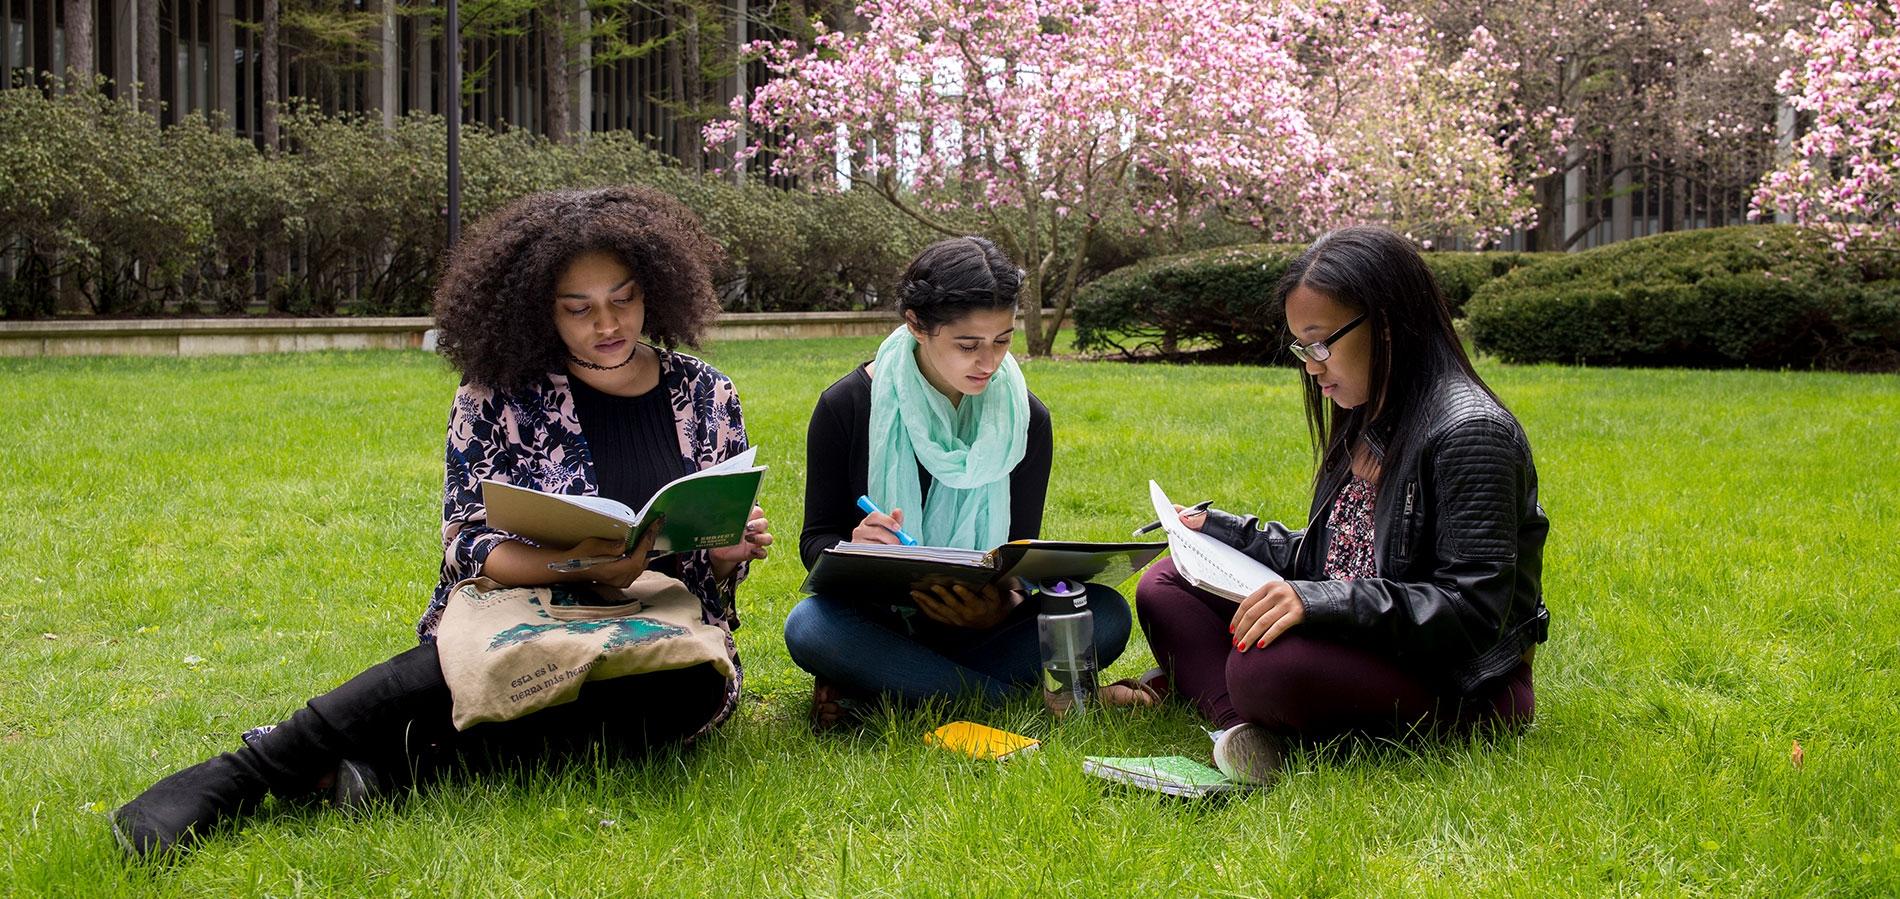 Three women reading in the grass together